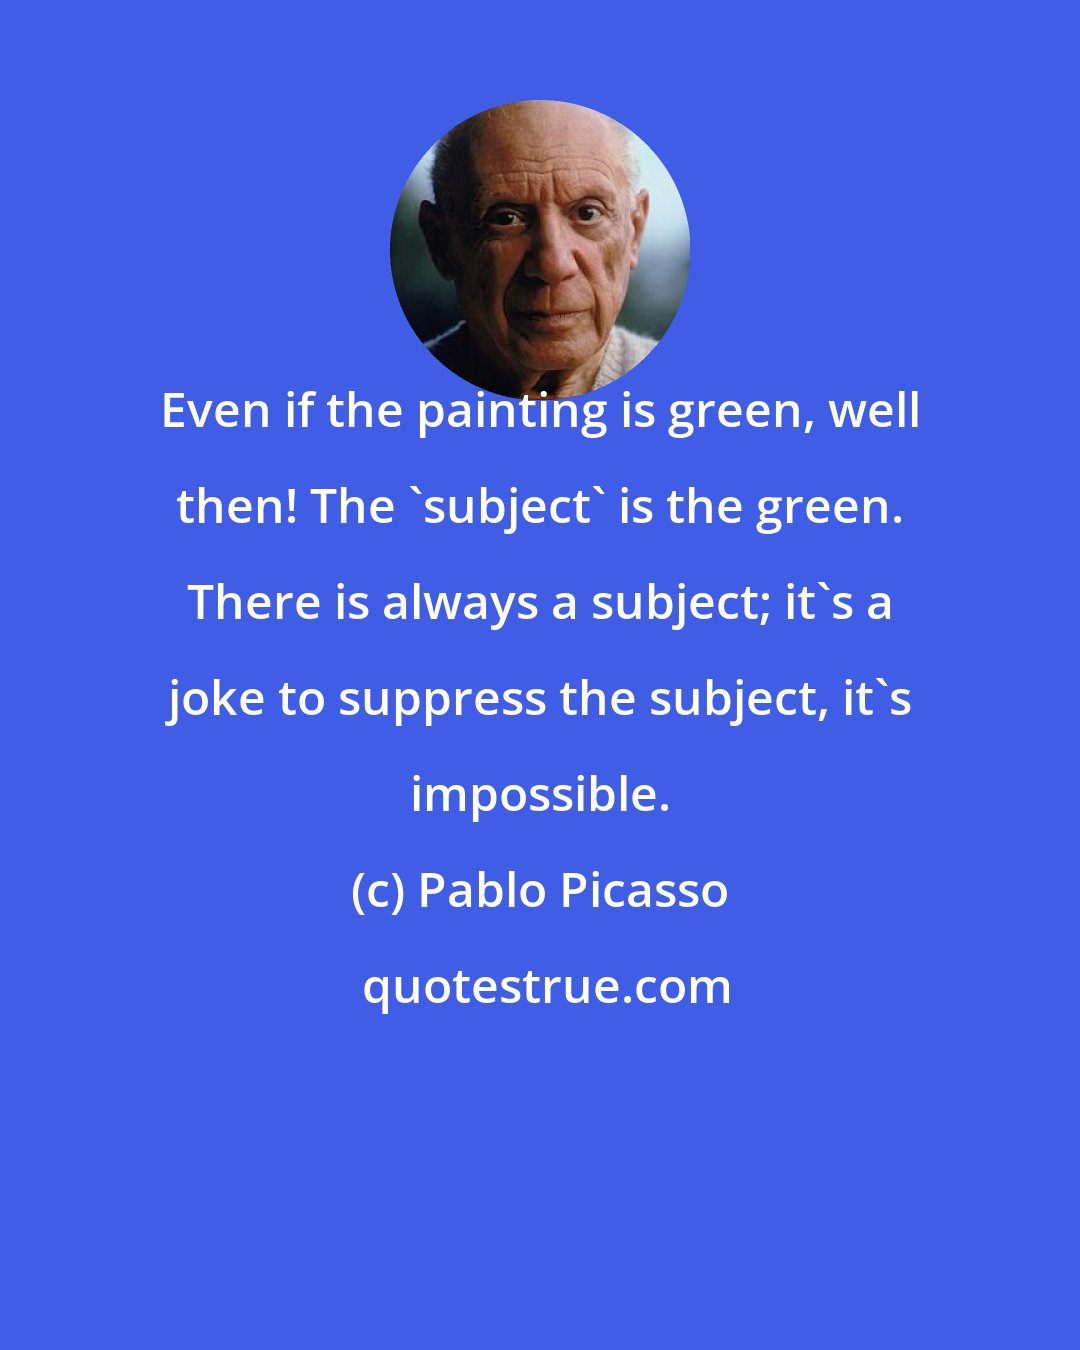 Pablo Picasso: Even if the painting is green, well then! The 'subject' is the green. There is always a subject; it's a joke to suppress the subject, it's impossible.